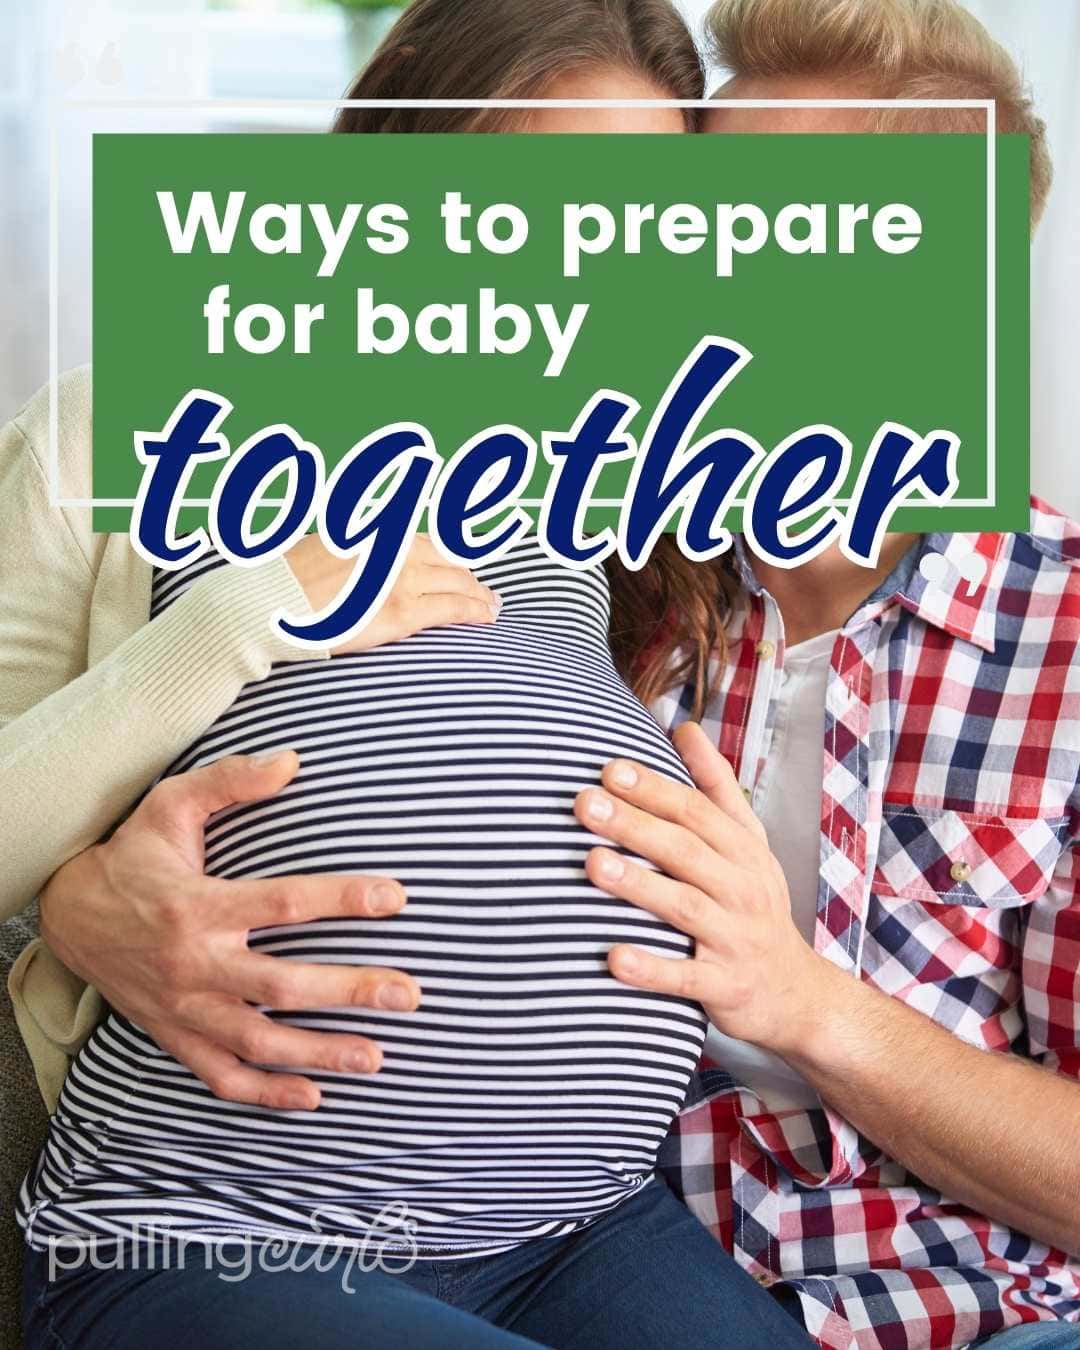 How can we prepare together for the new baby or labor? via @pullingcurls